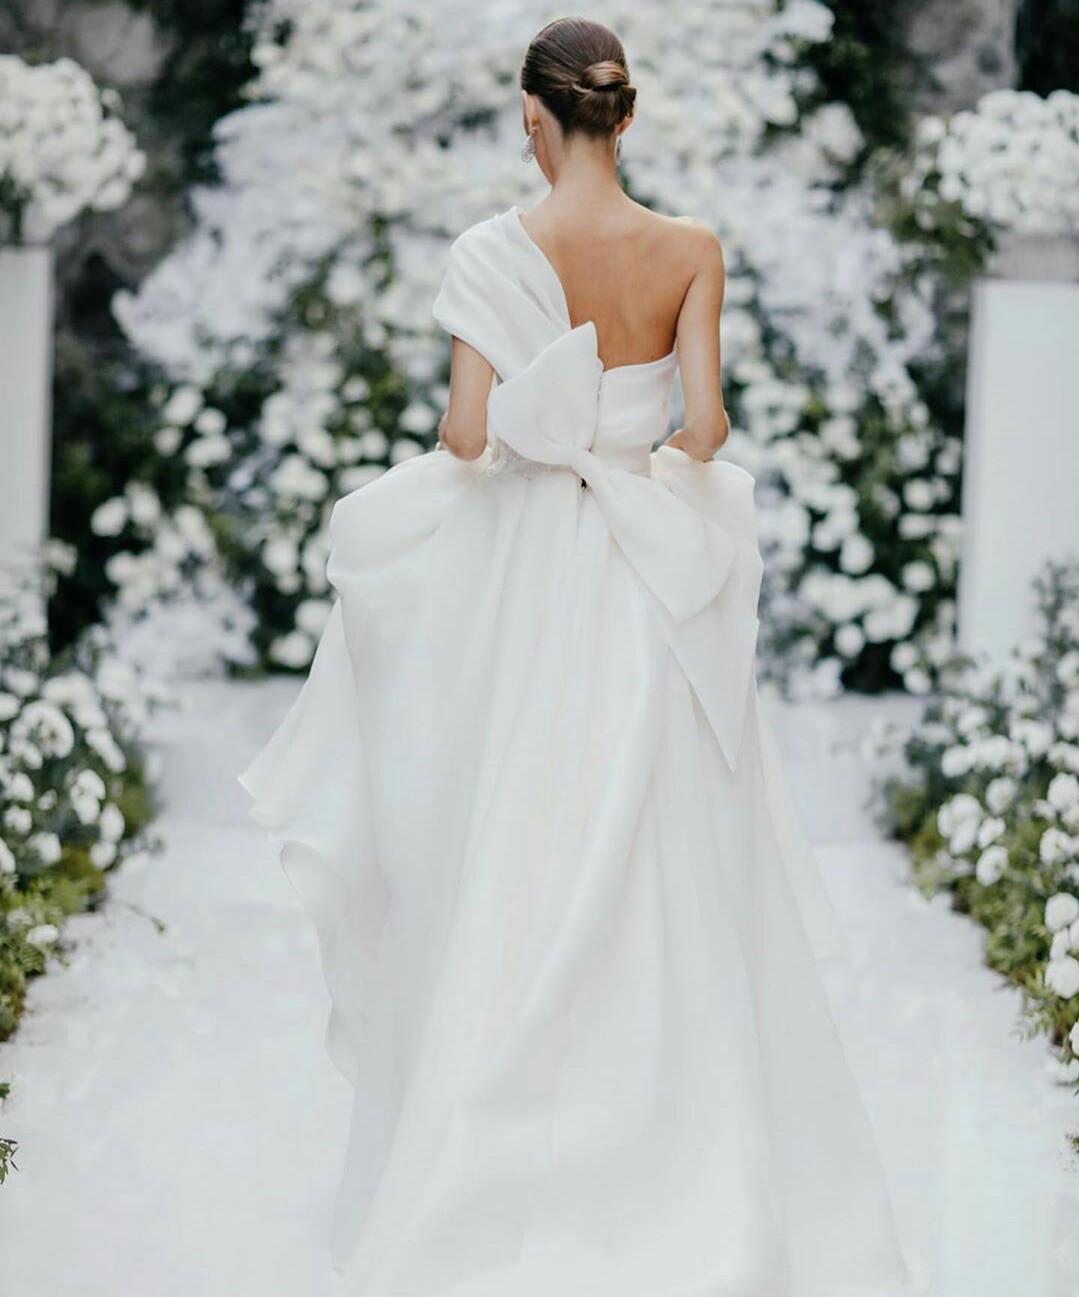 One Shoulder Ball Gown Wedding Dress With Bows And Front Slit